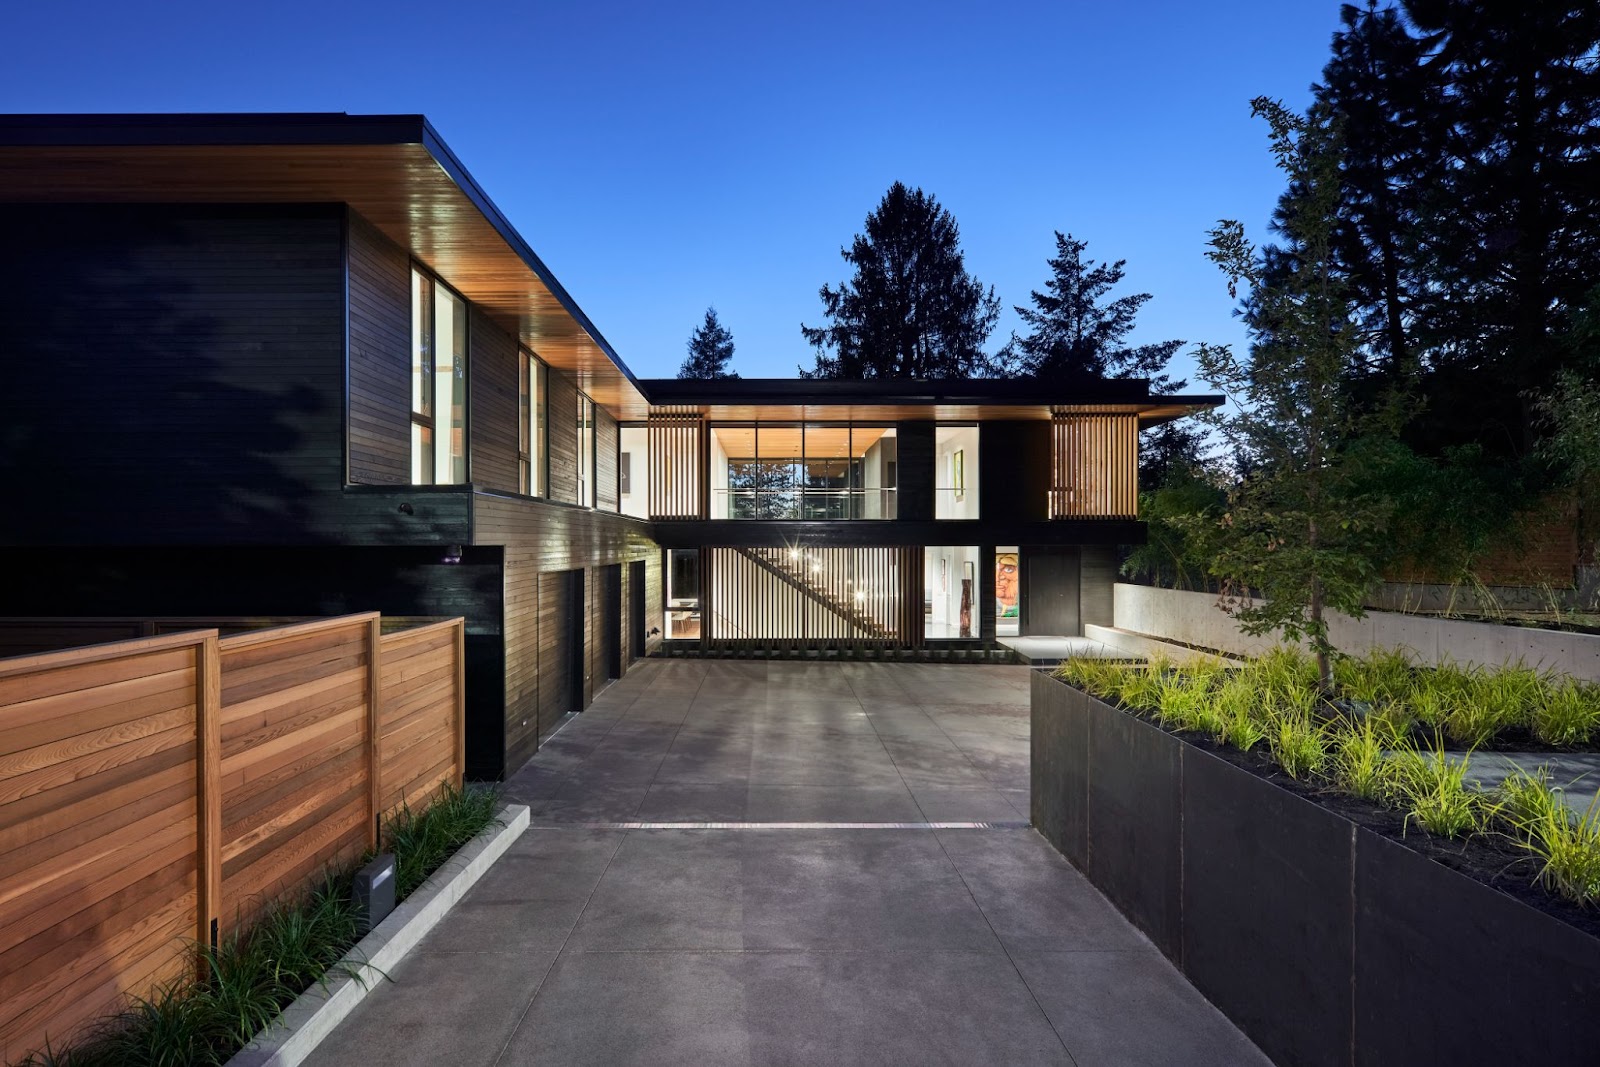 nighttime shot of a recently built beautiful modern home with black walls